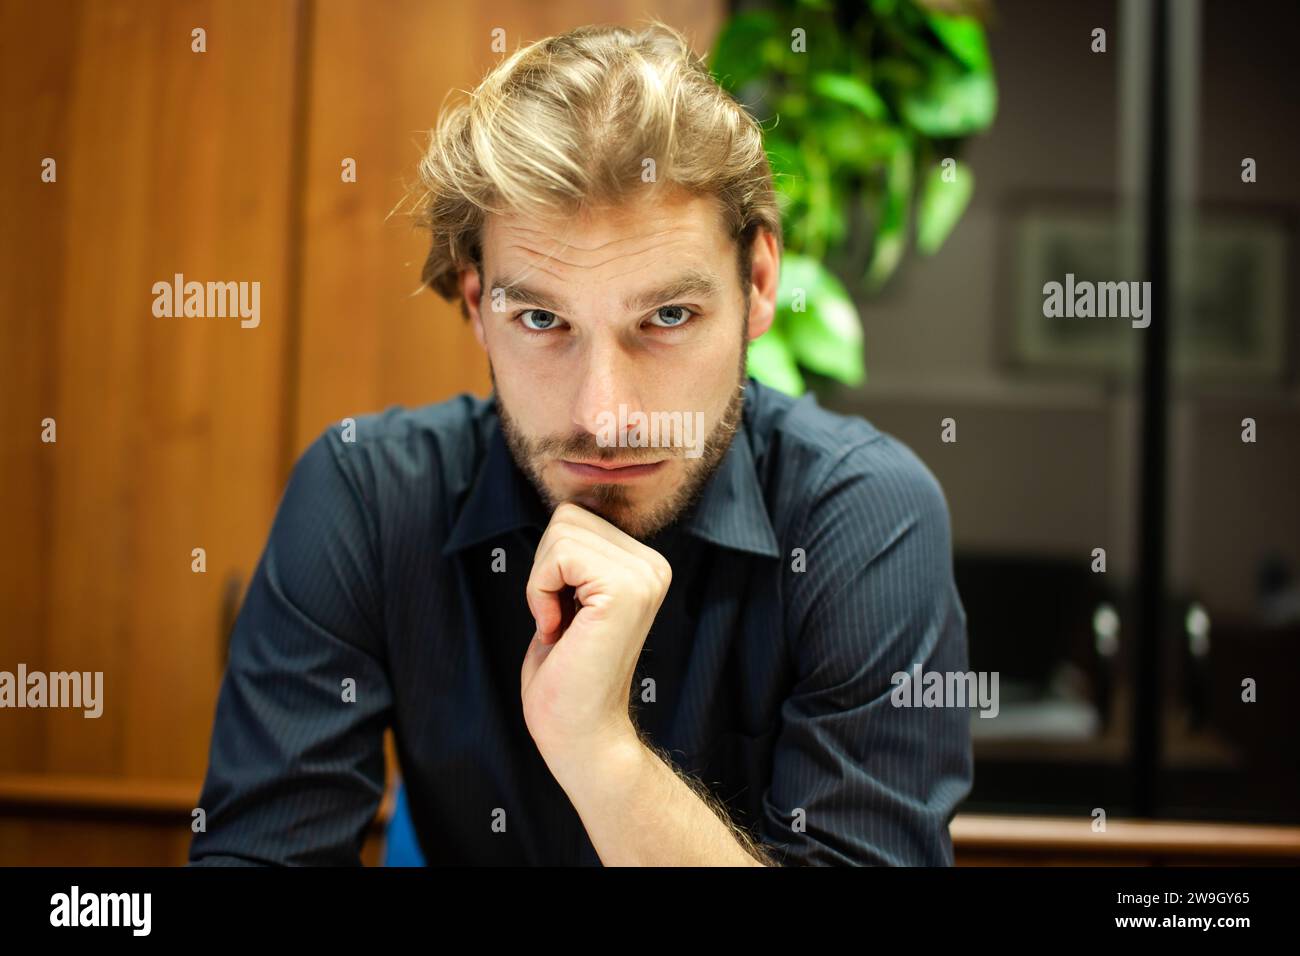 Man in a blue shirt with a pensive look on his face Stock Photo